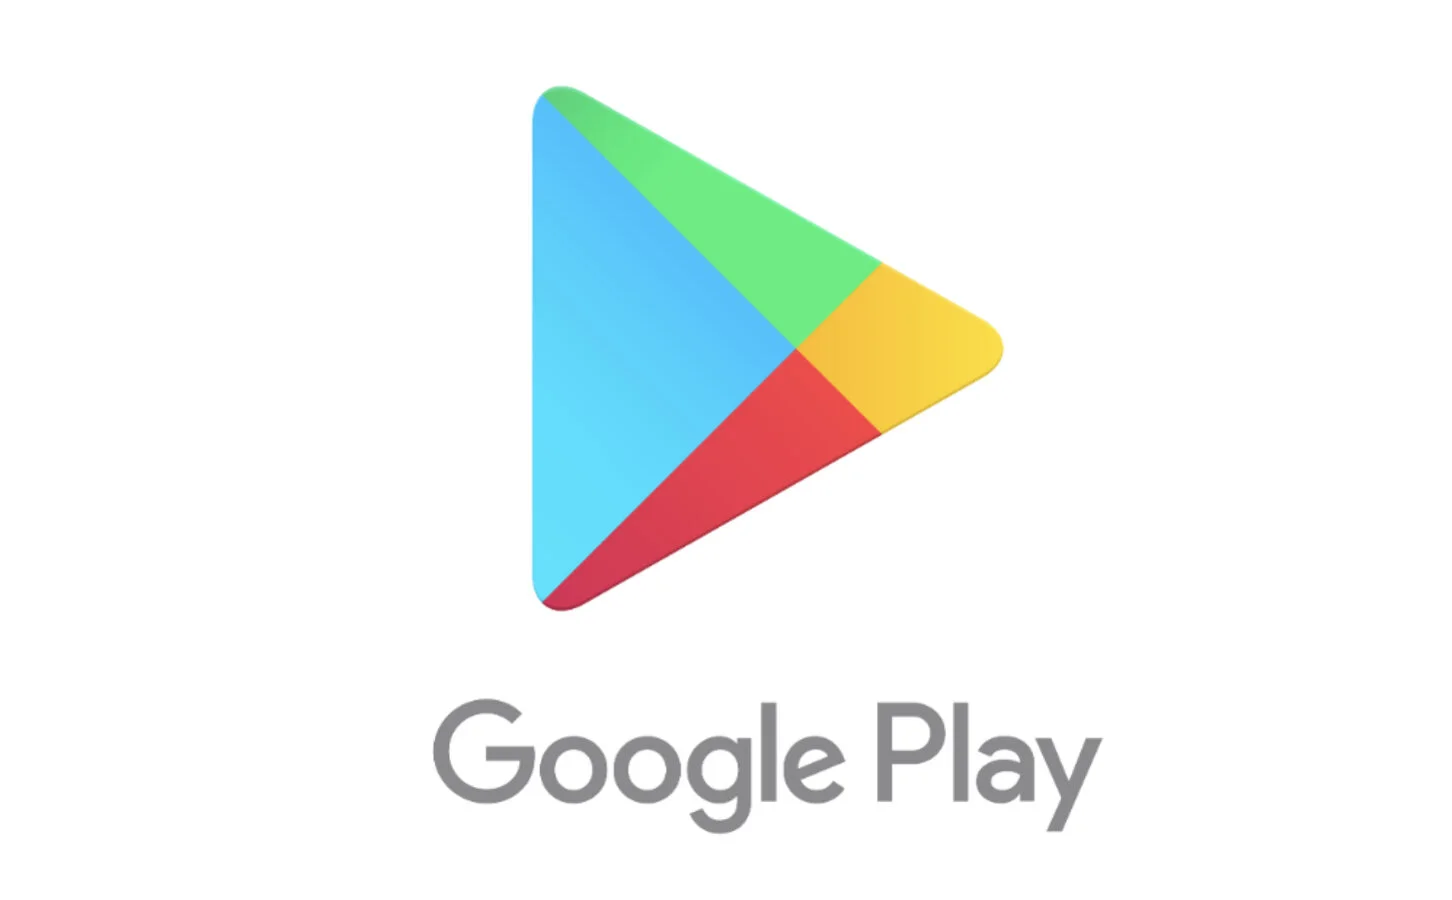 Old Google Play logo. More pointy. Credit: Google